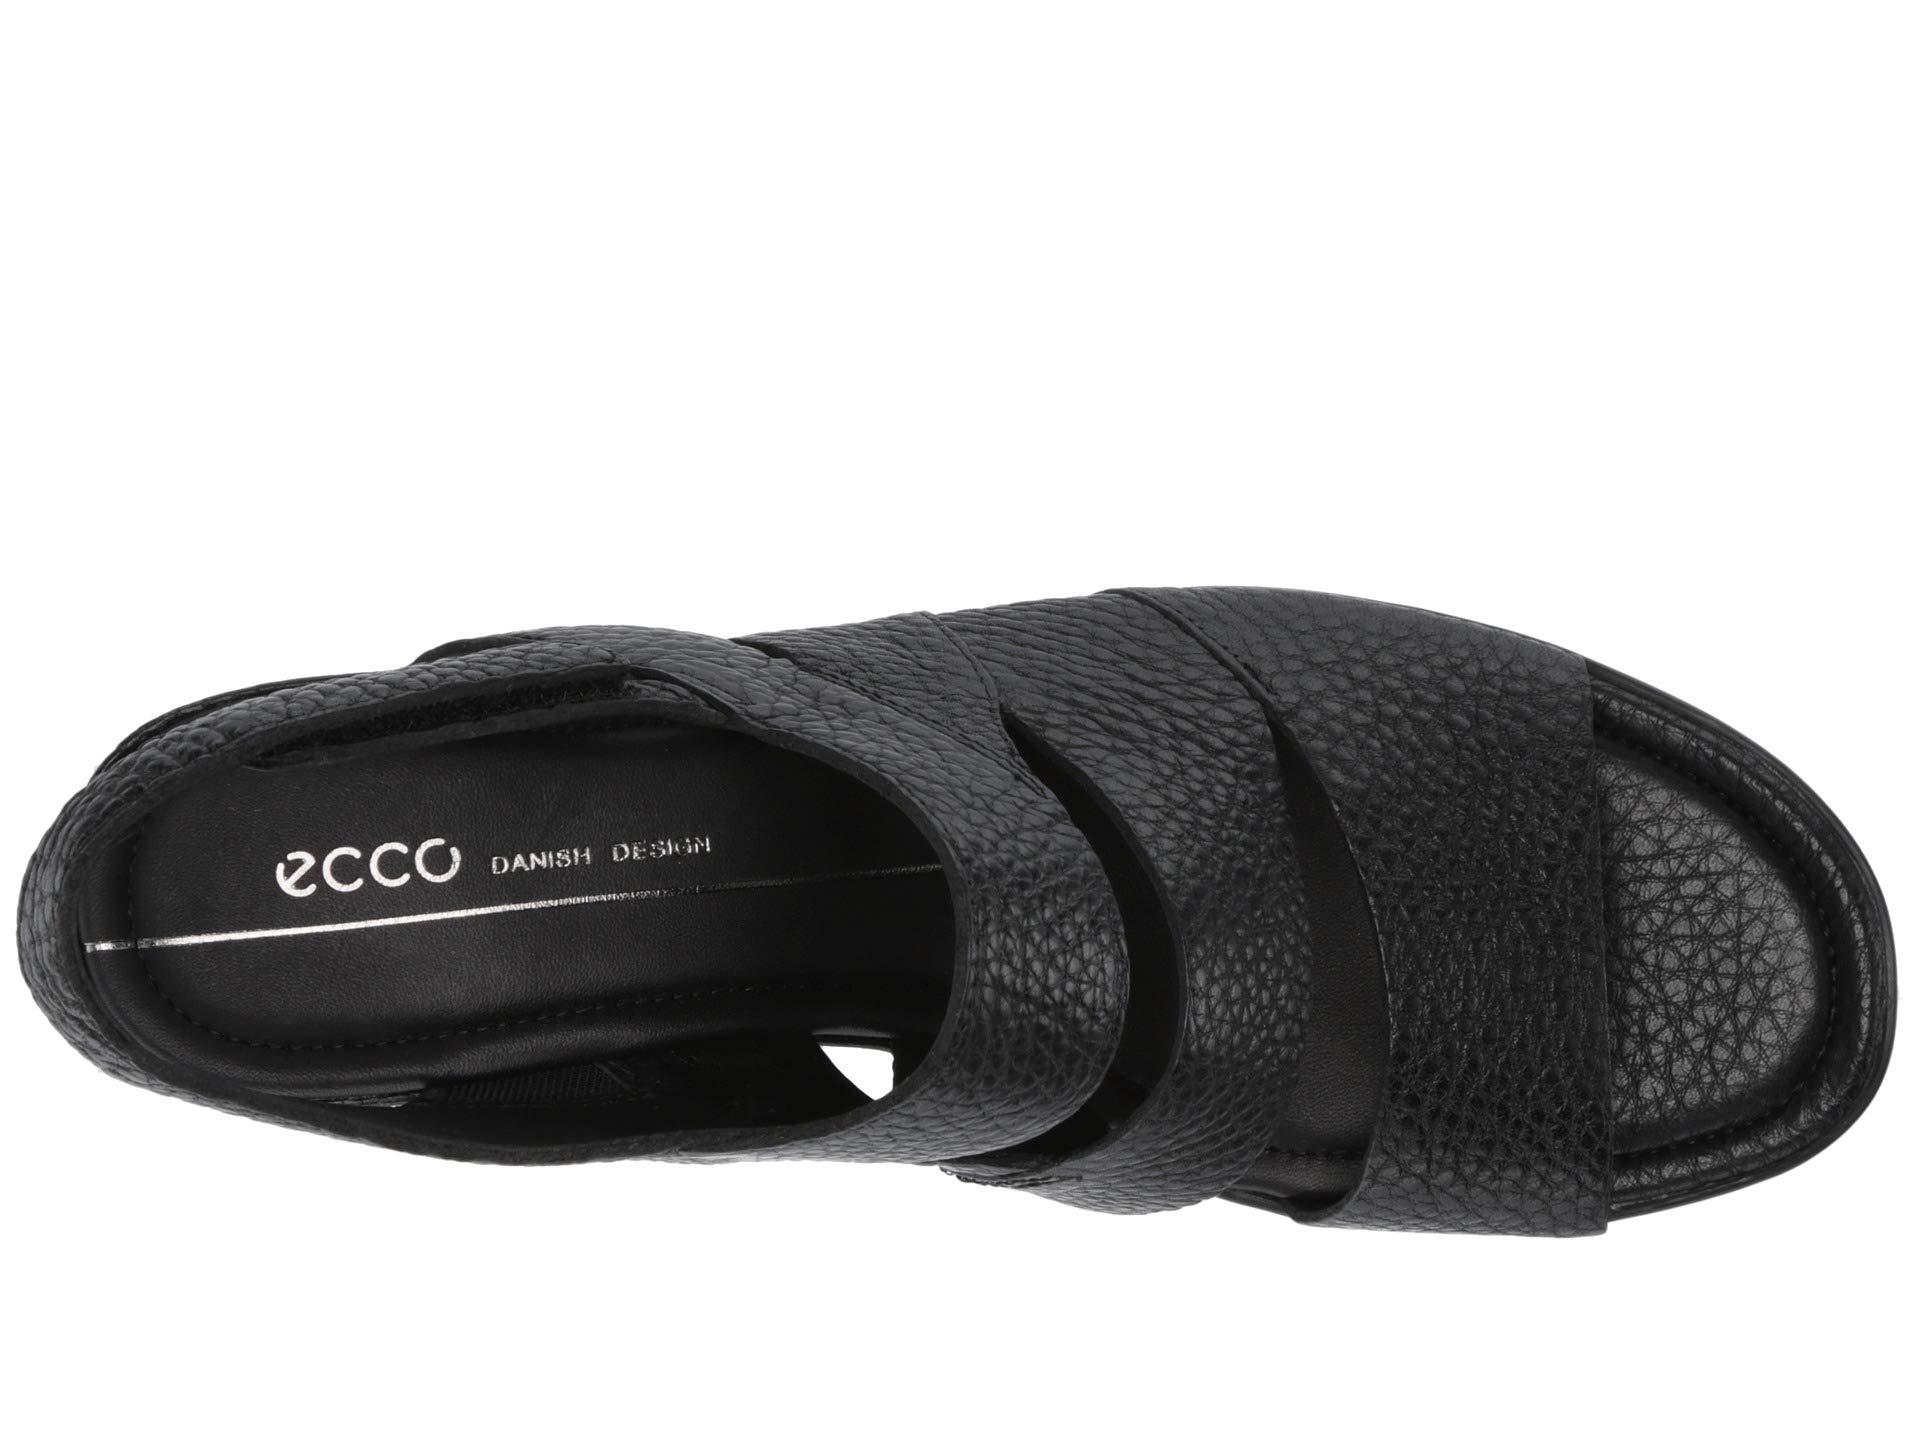 Ecco Leather Shape Plateau Wedge Sandal in Black Cow Leather (Black) - Save  67% - Lyst